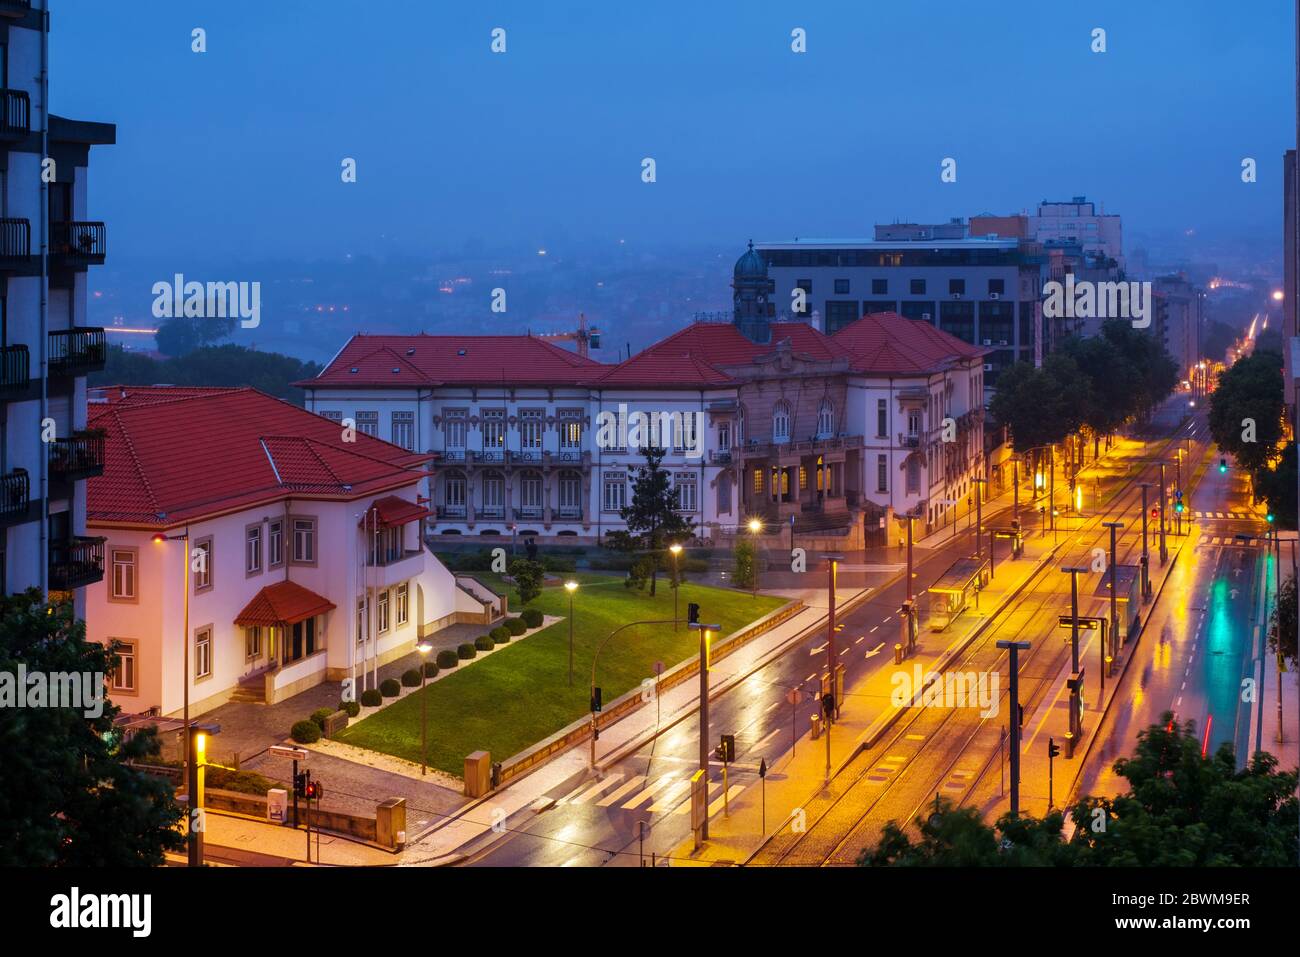 Gaia, Portugal. Aerial view of historical buildings in Gaia, Portugal at night. Porto city at the background Stock Photo